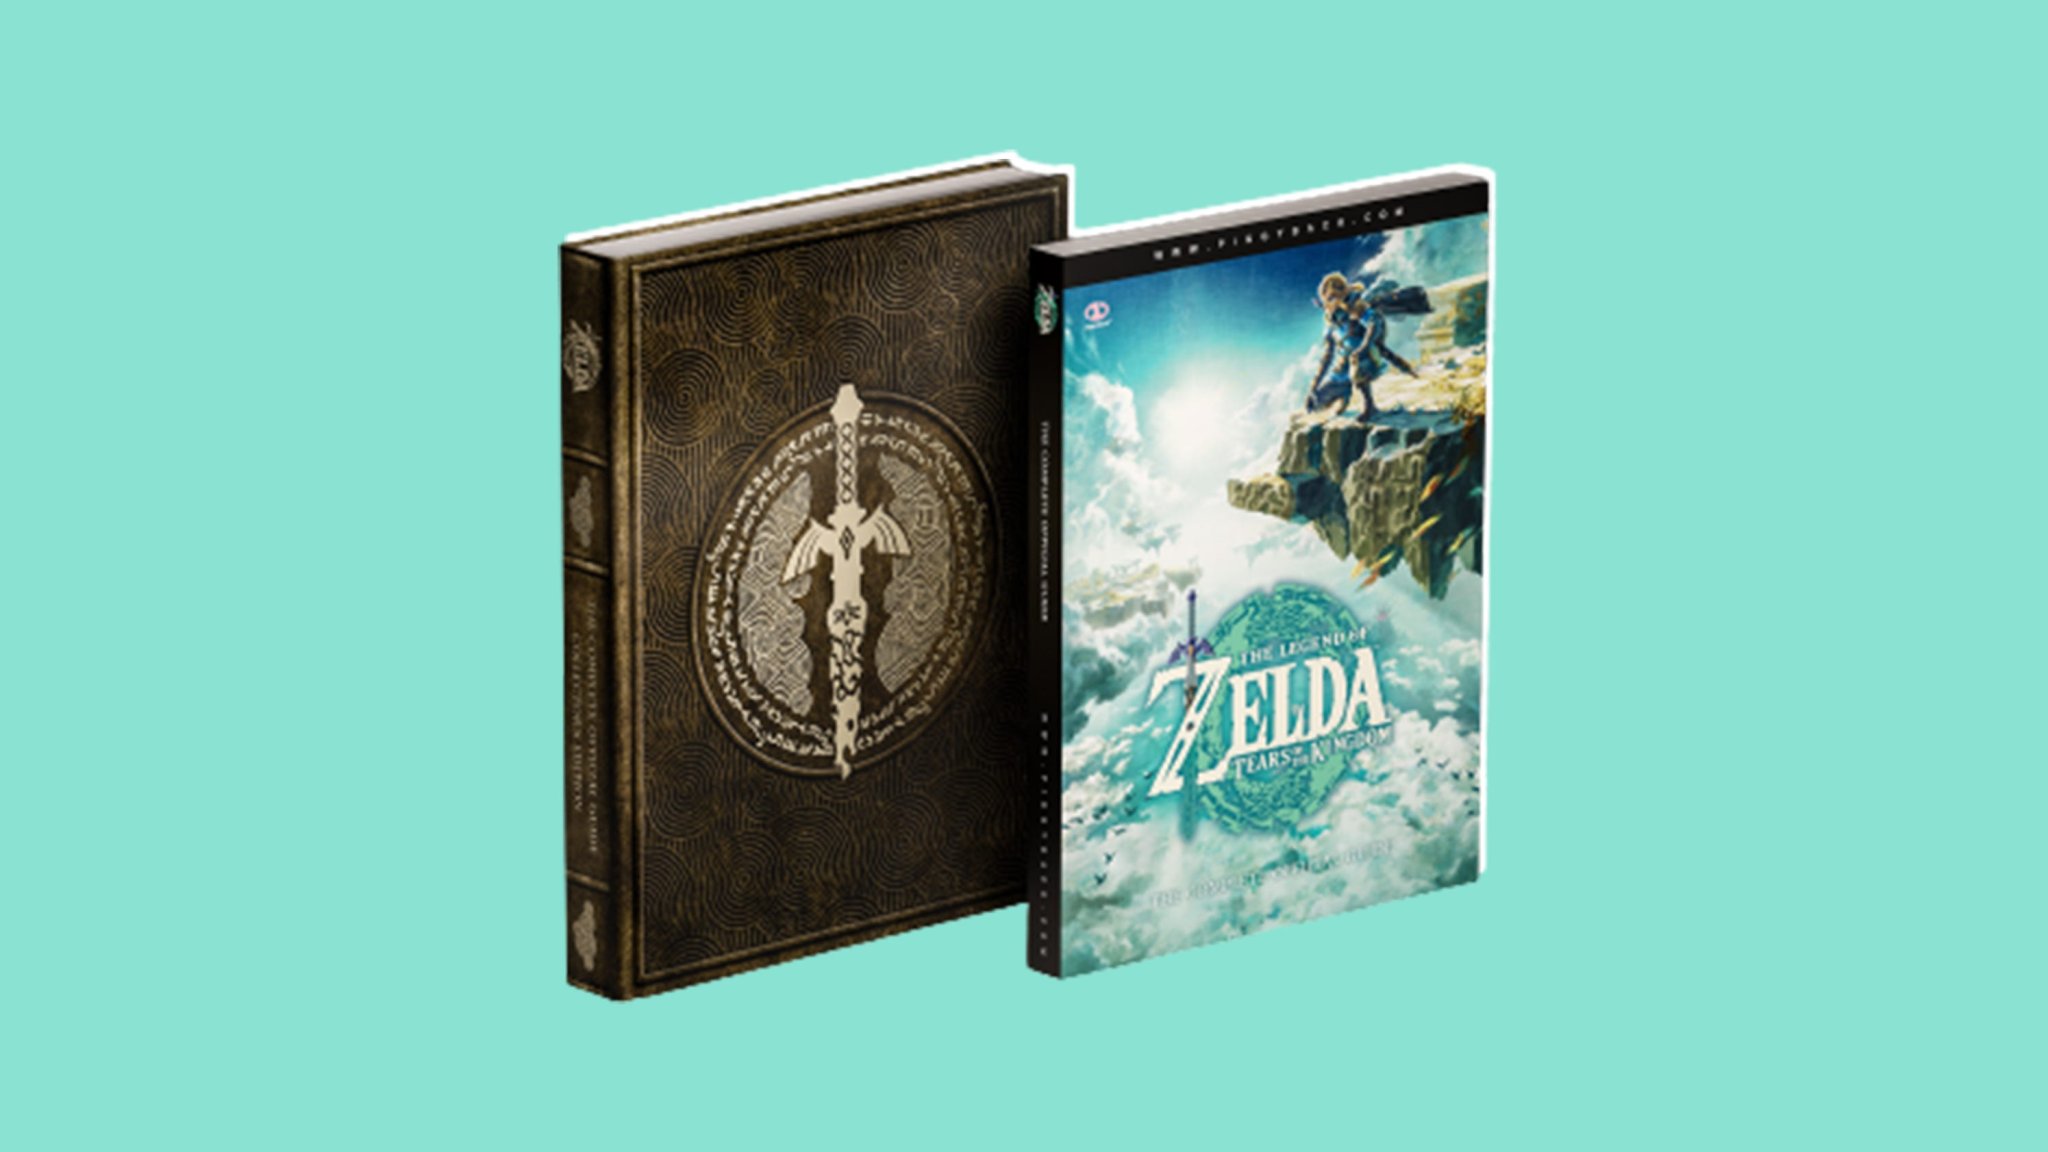 Save 40% on "The Legend of Zelda: Tears of the Kingdom" guide book